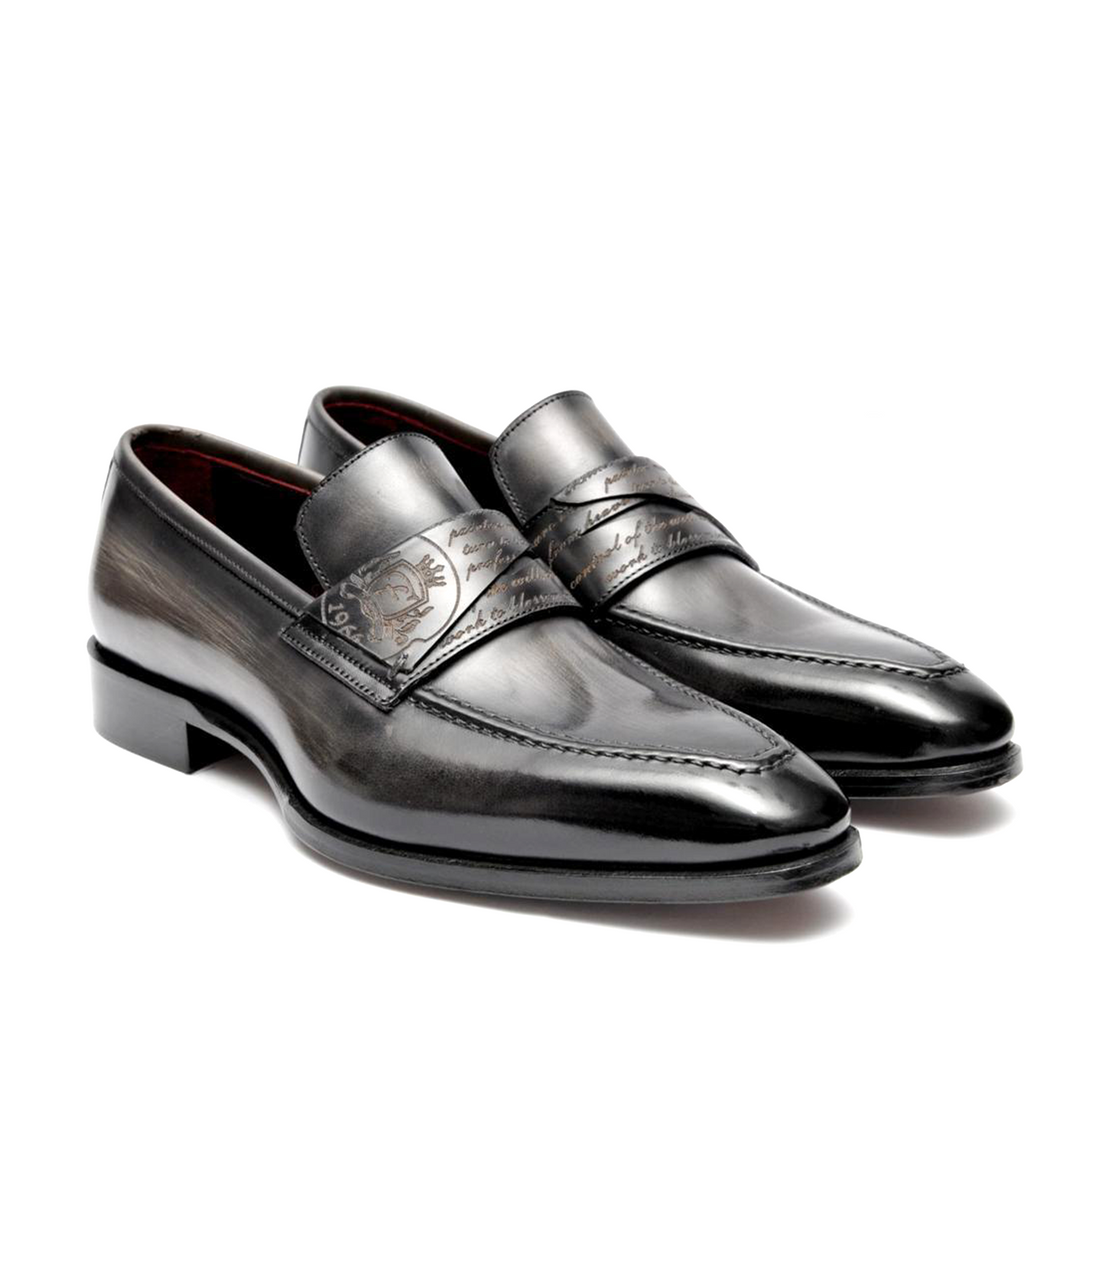 FILANGIERI - STAINED GREY LEATHER DRESS LOAFER WITH CURSIVE ON IN-STEP